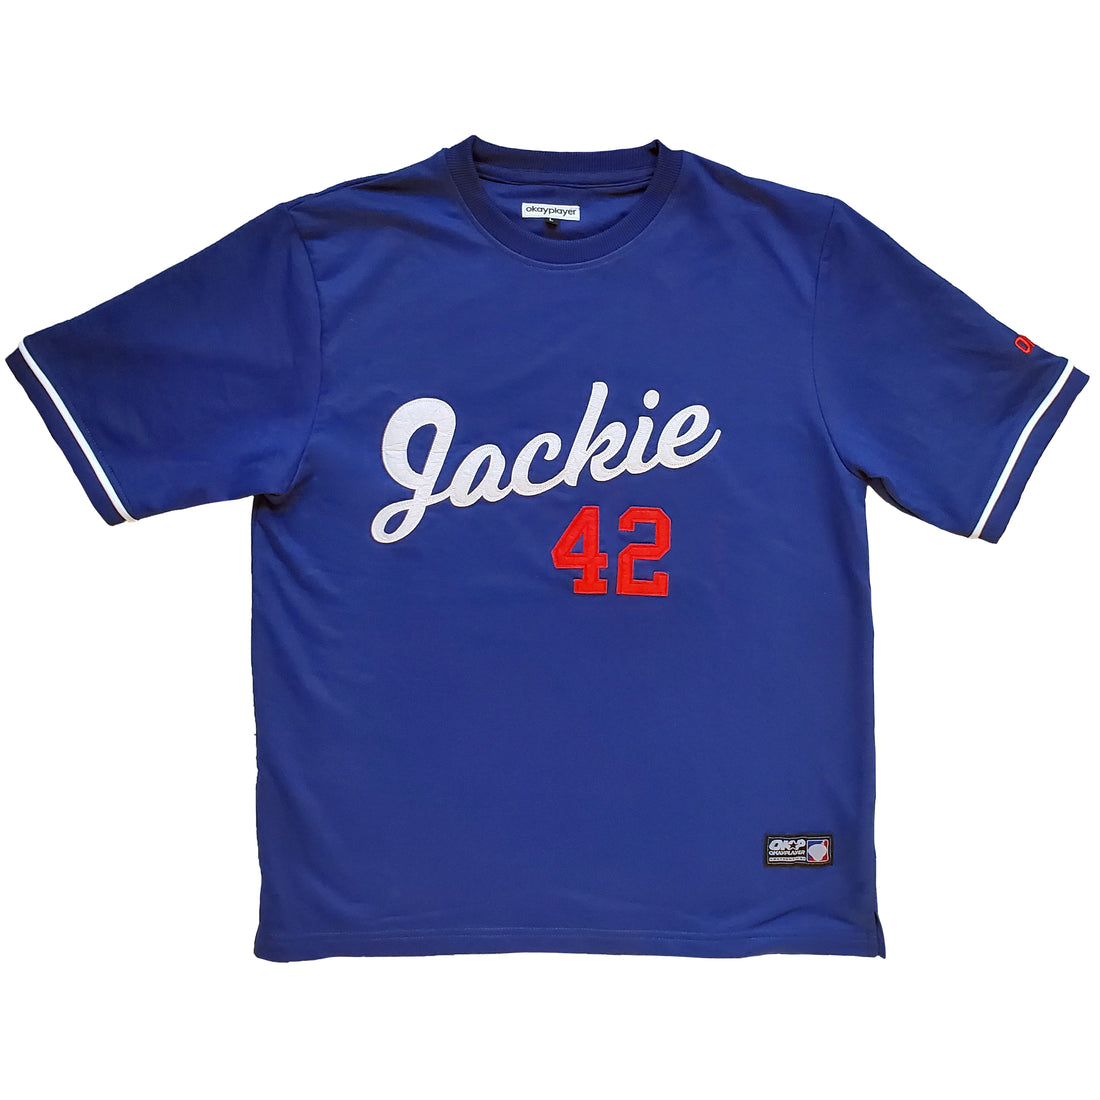 Jackie 42 Premium French Terry T-Shirt